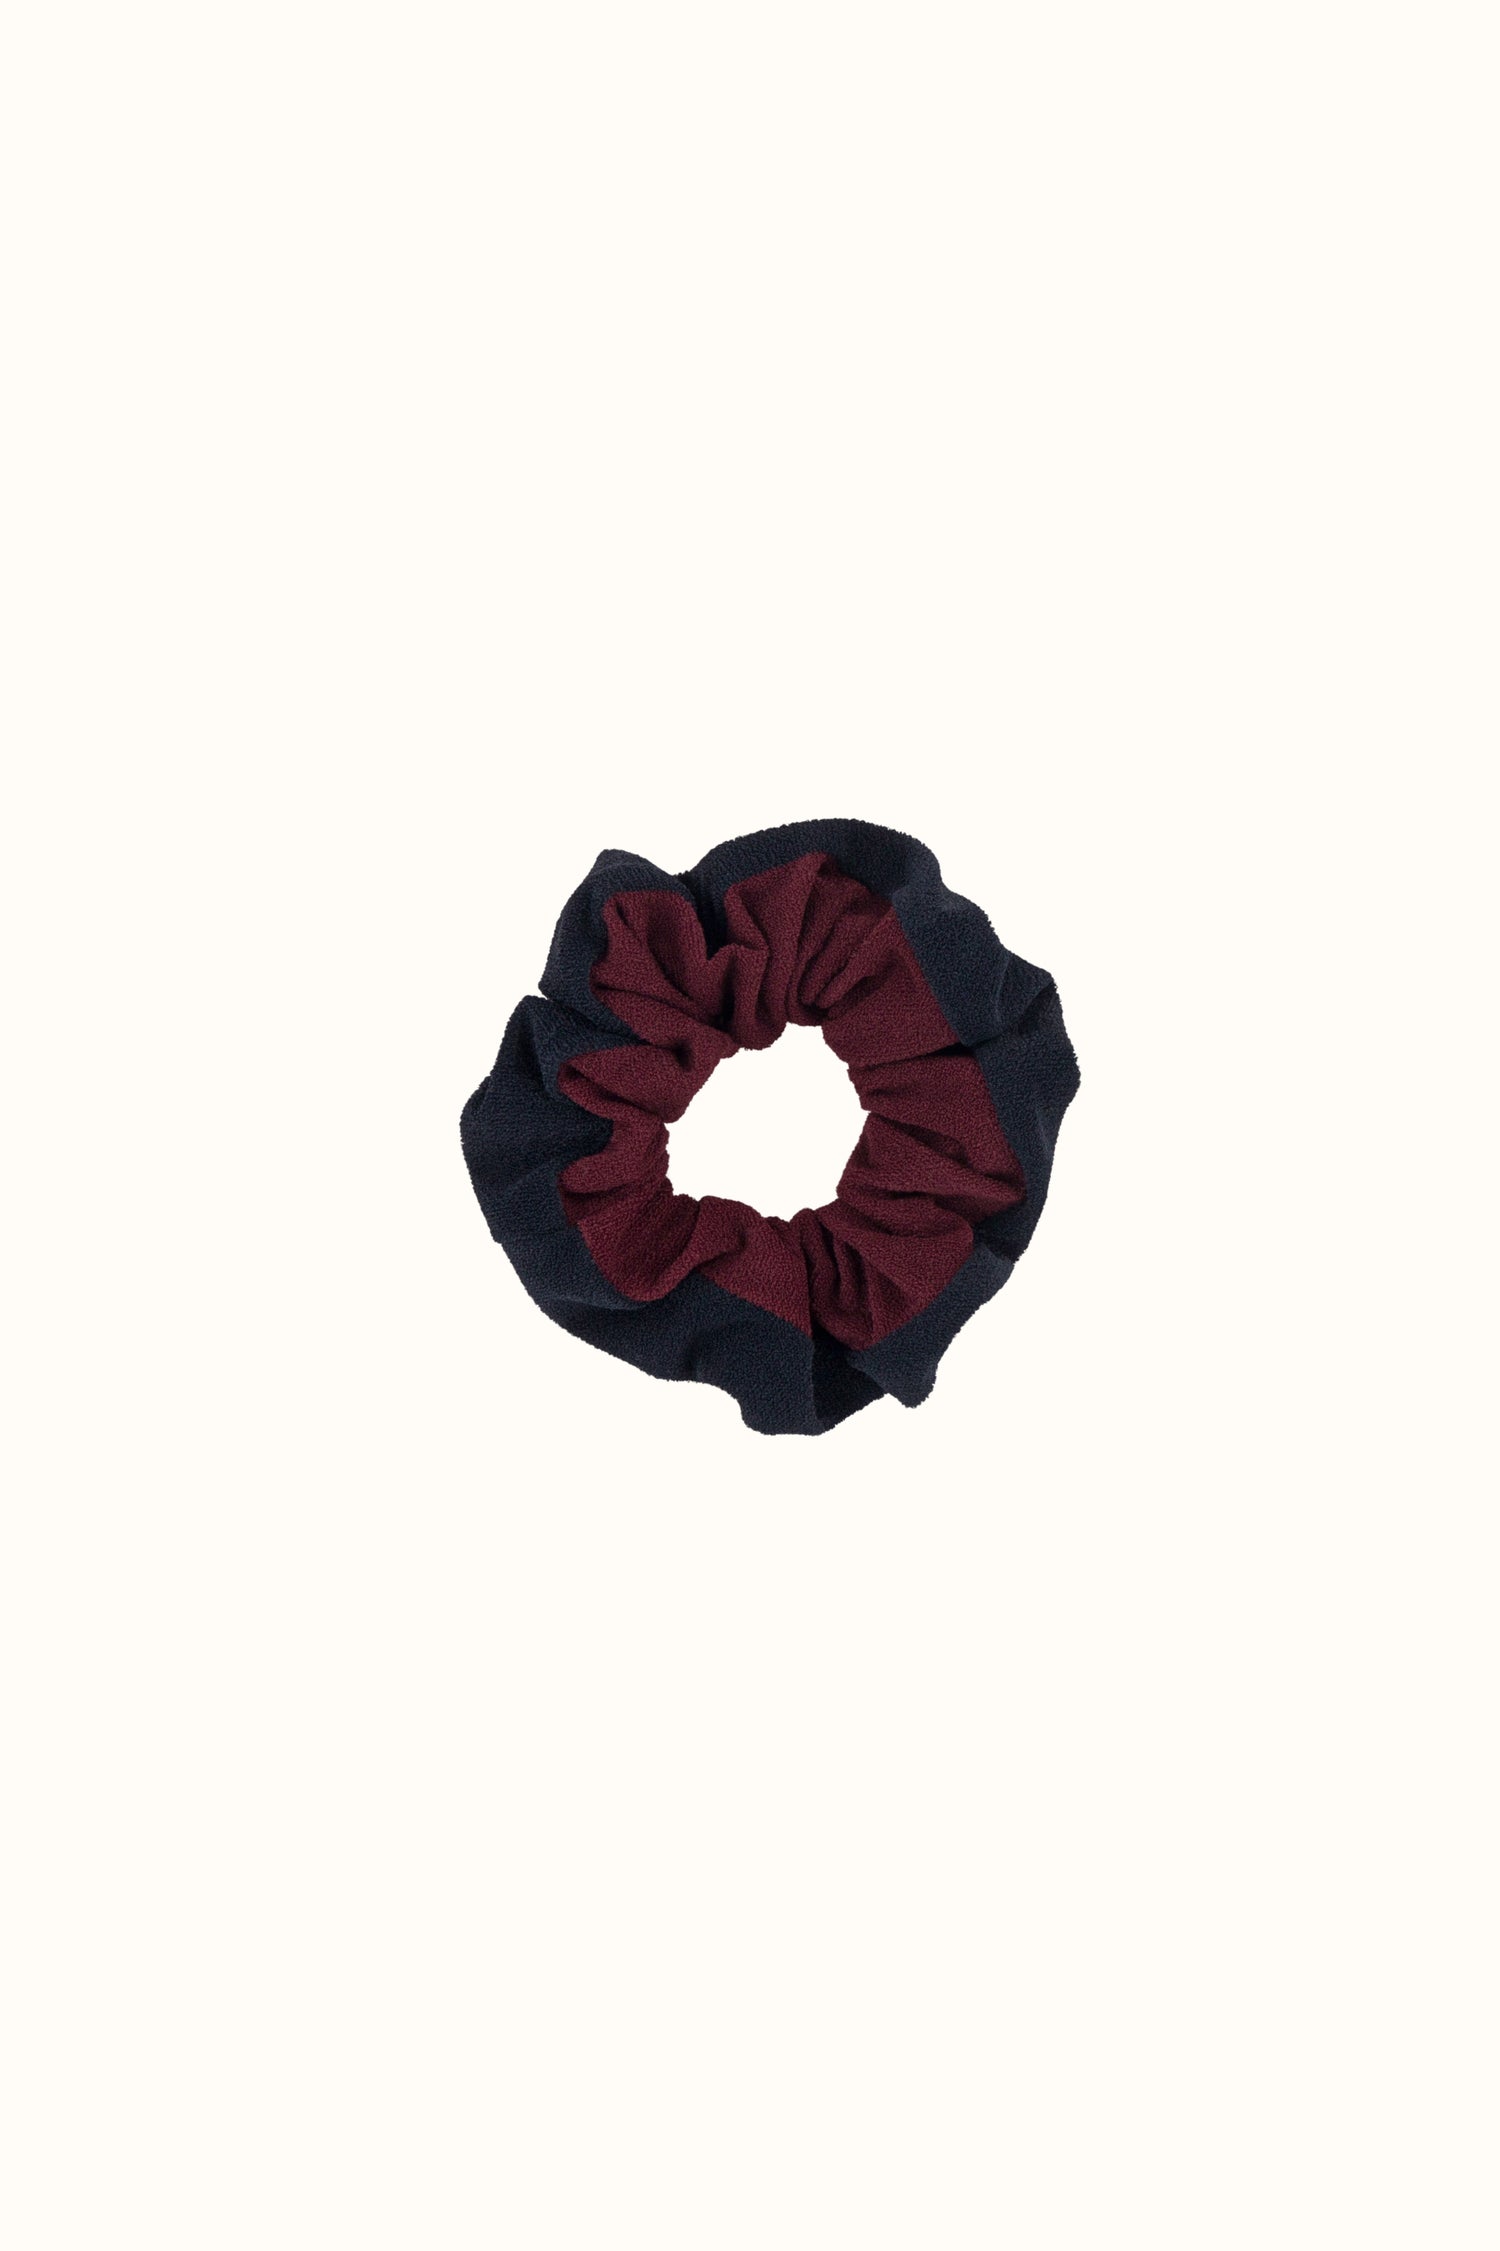 The Coco Terry Bow Scrunchie